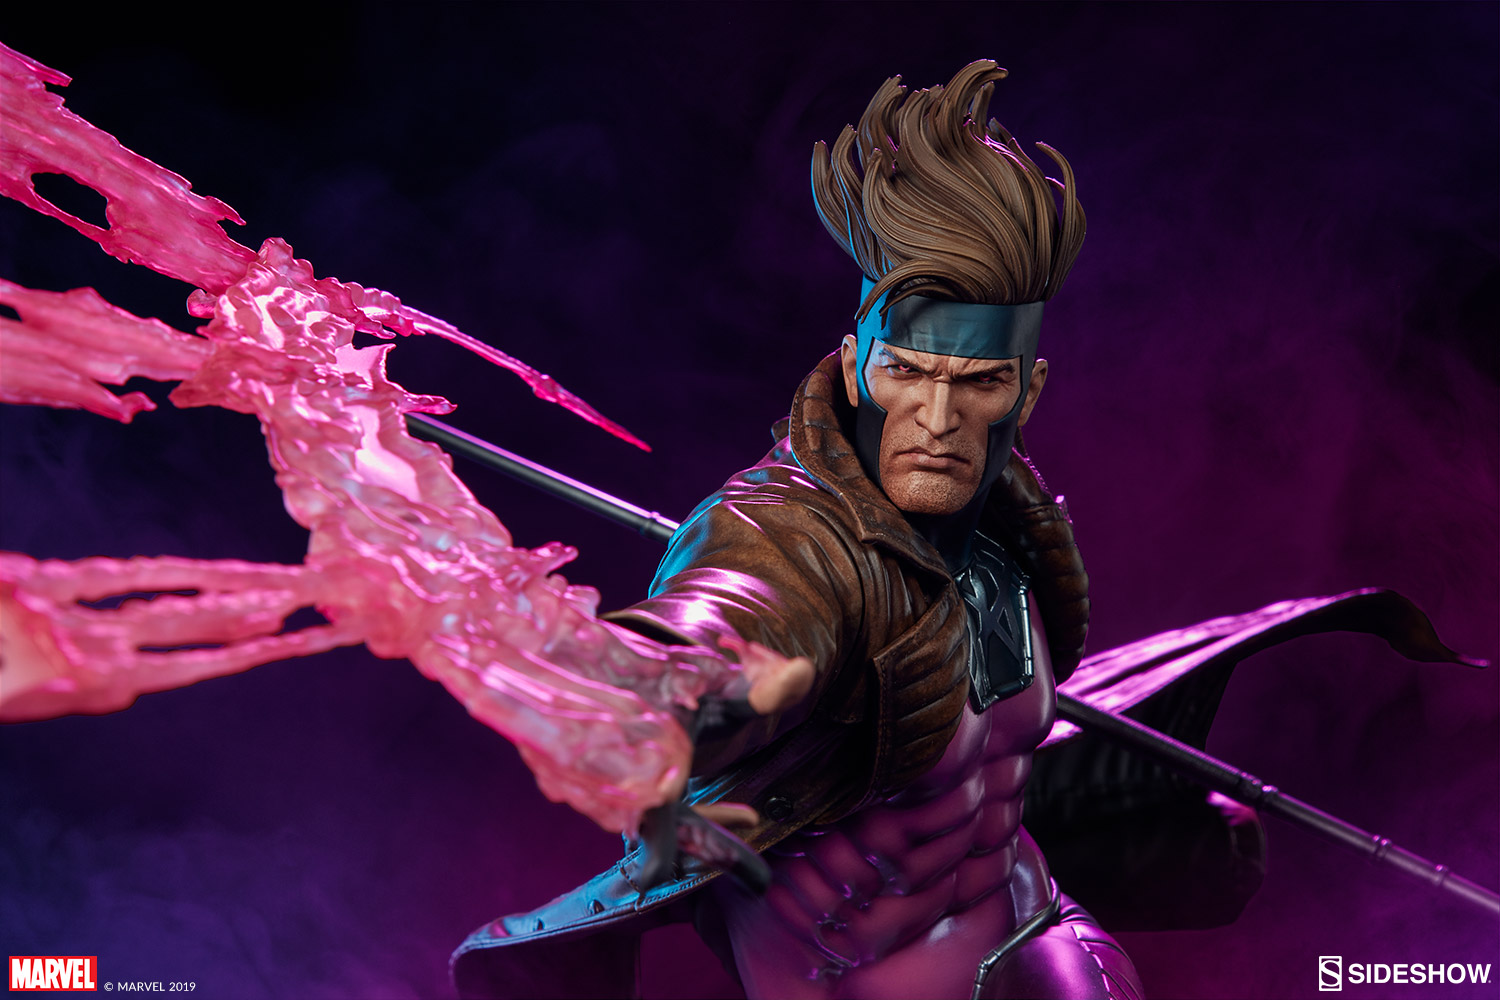 https://www.sideshow.com/storage/product-images/300727/gambit_marvel_gallery_5d66e7d67839f.jpg